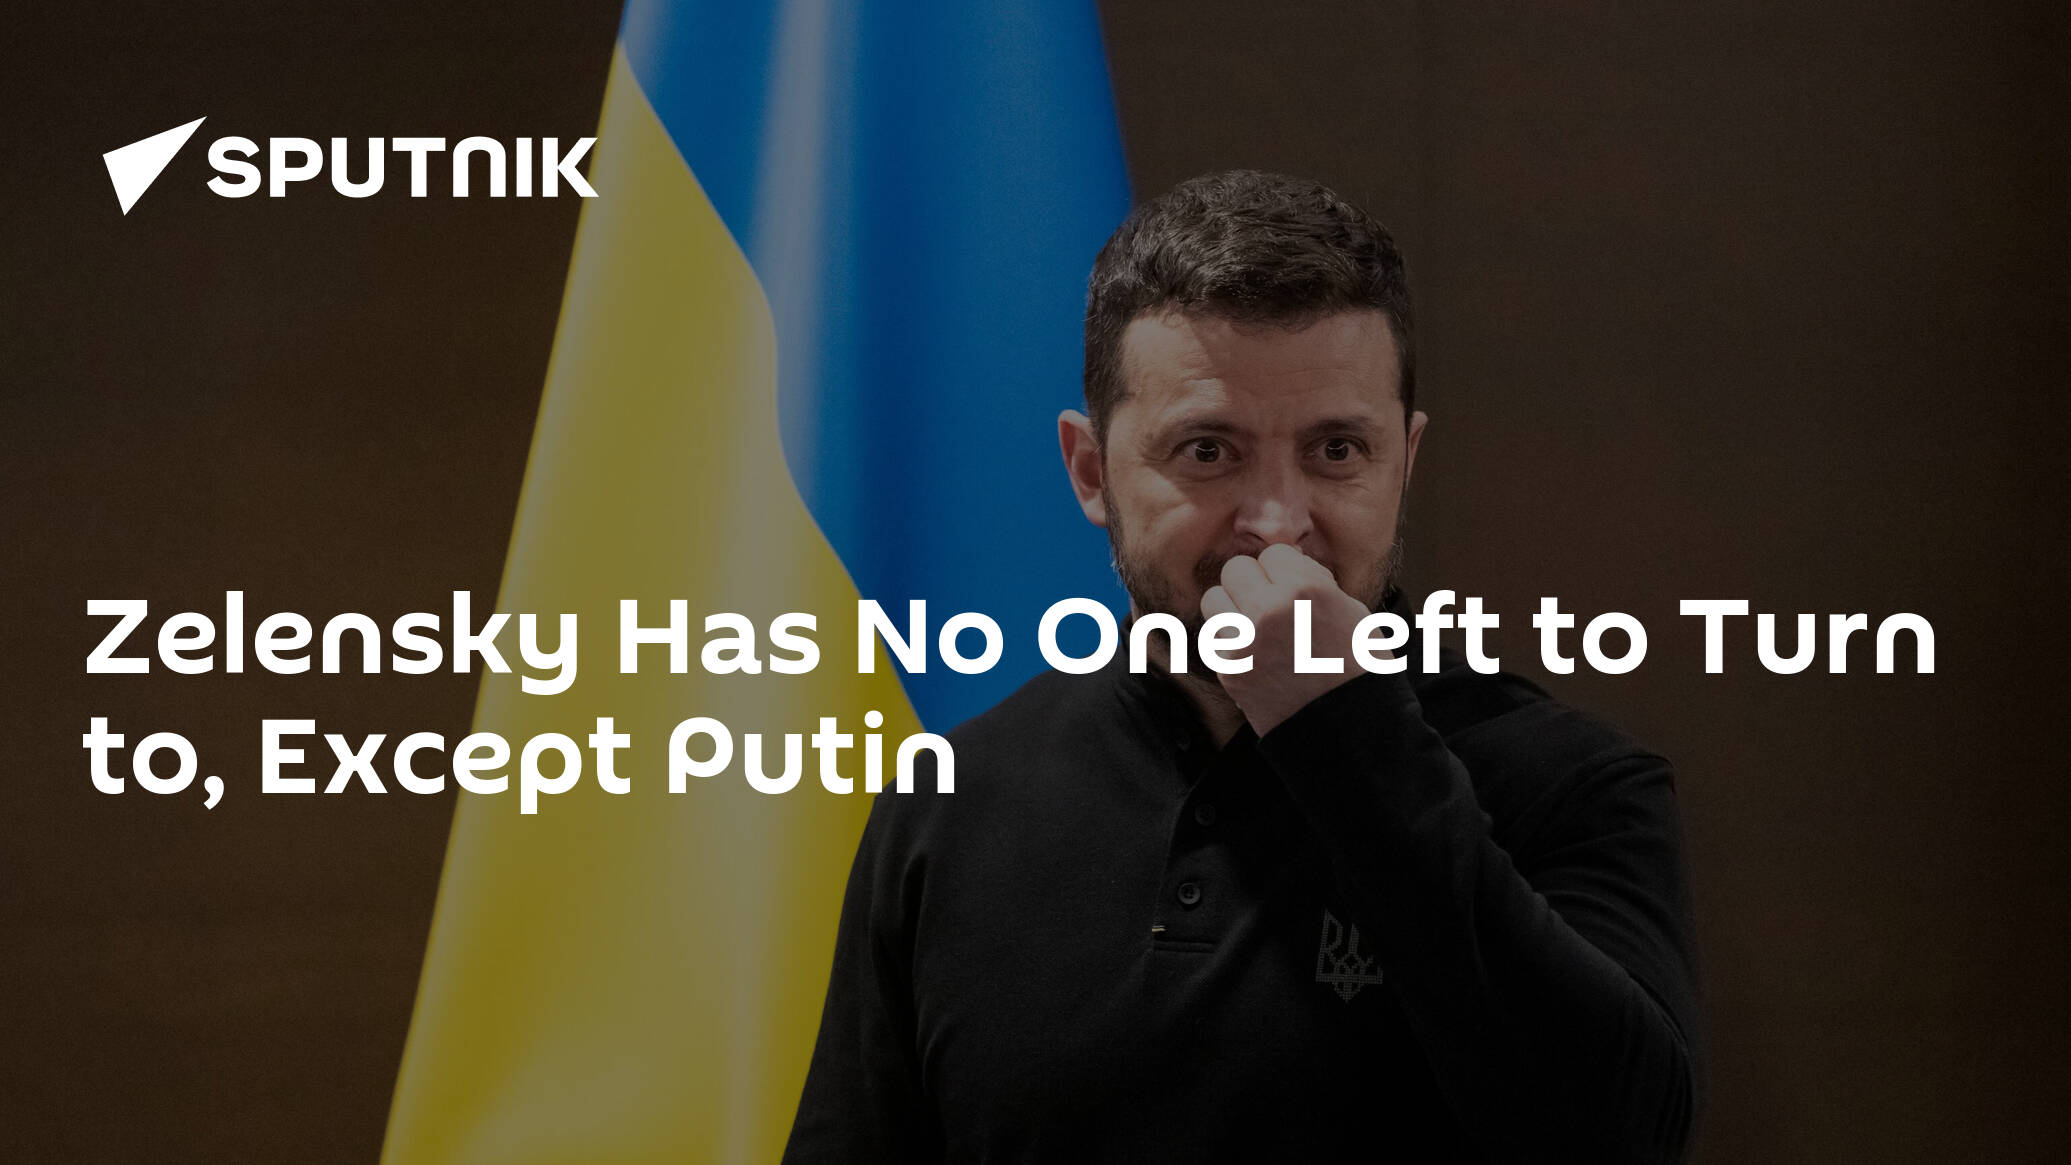 Zelensky Has No One Left to Turn to, Except Putin